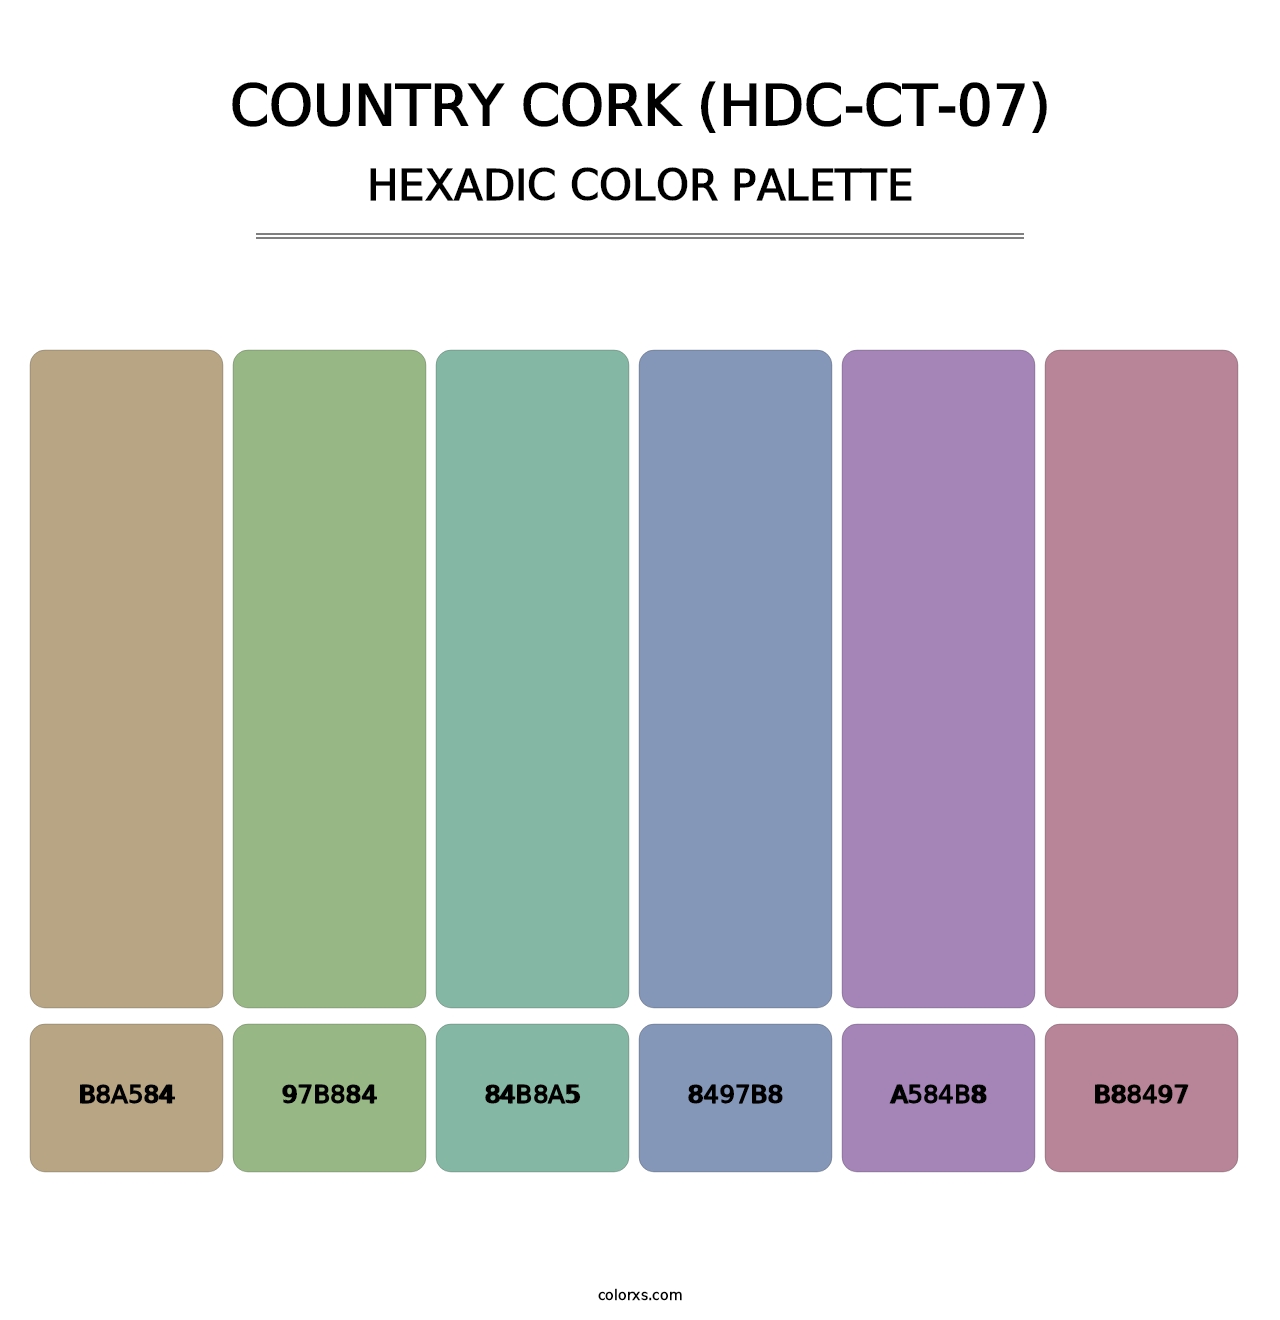 Country Cork (HDC-CT-07) - Hexadic Color Palette